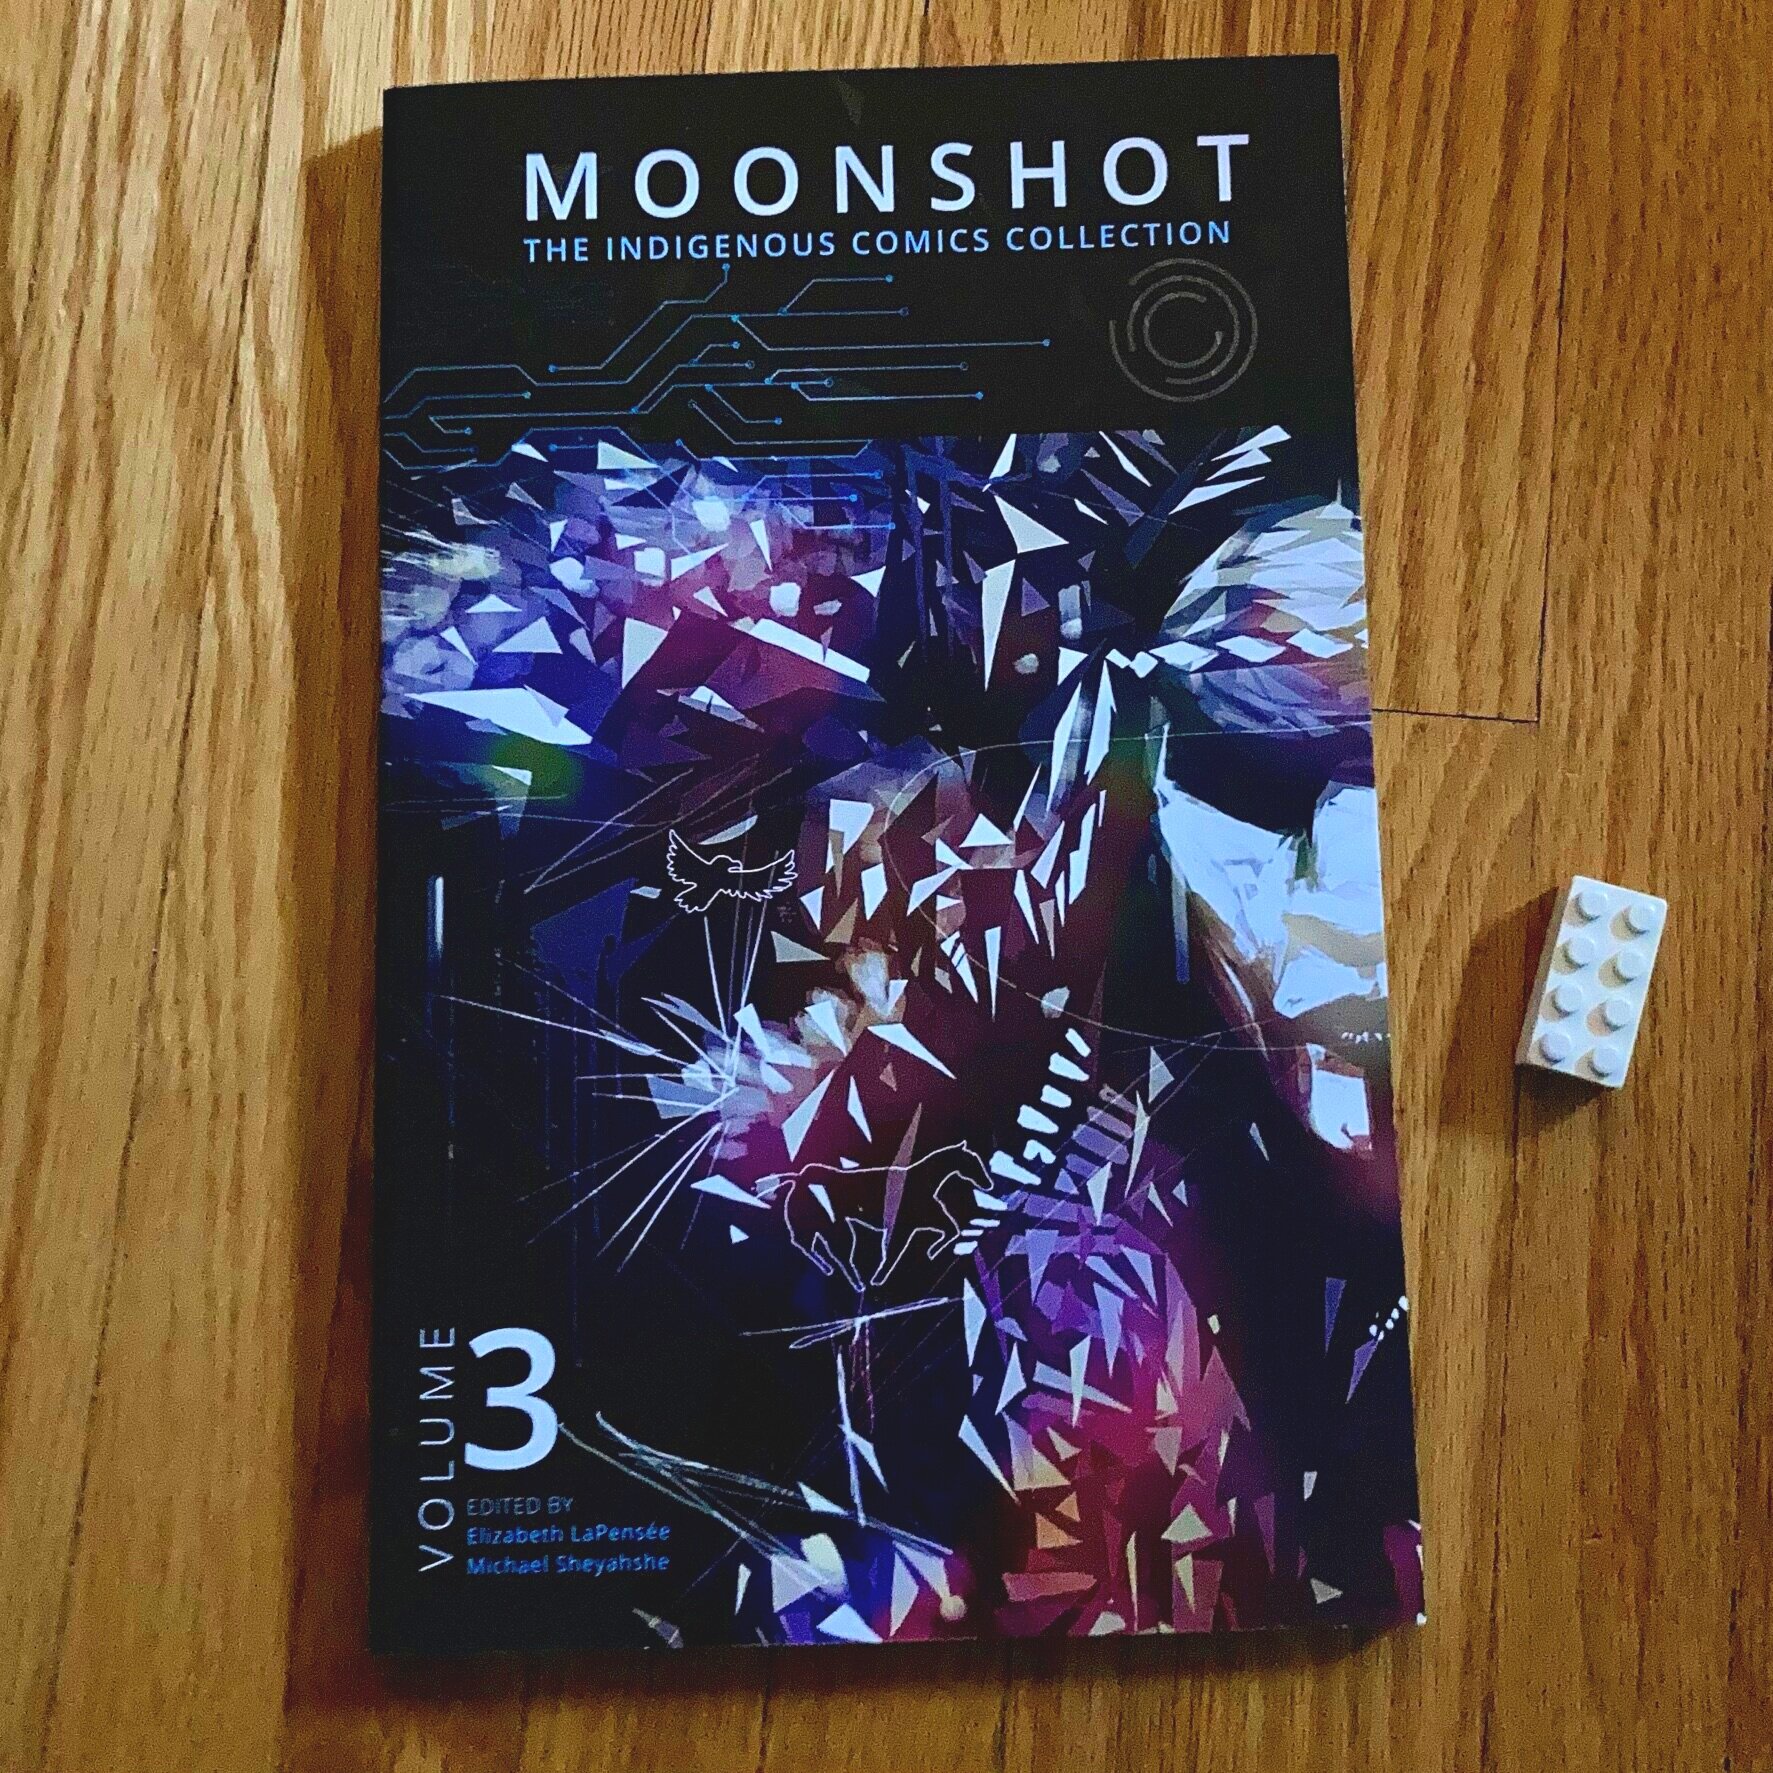 The cover of Moonshot, Volume 3